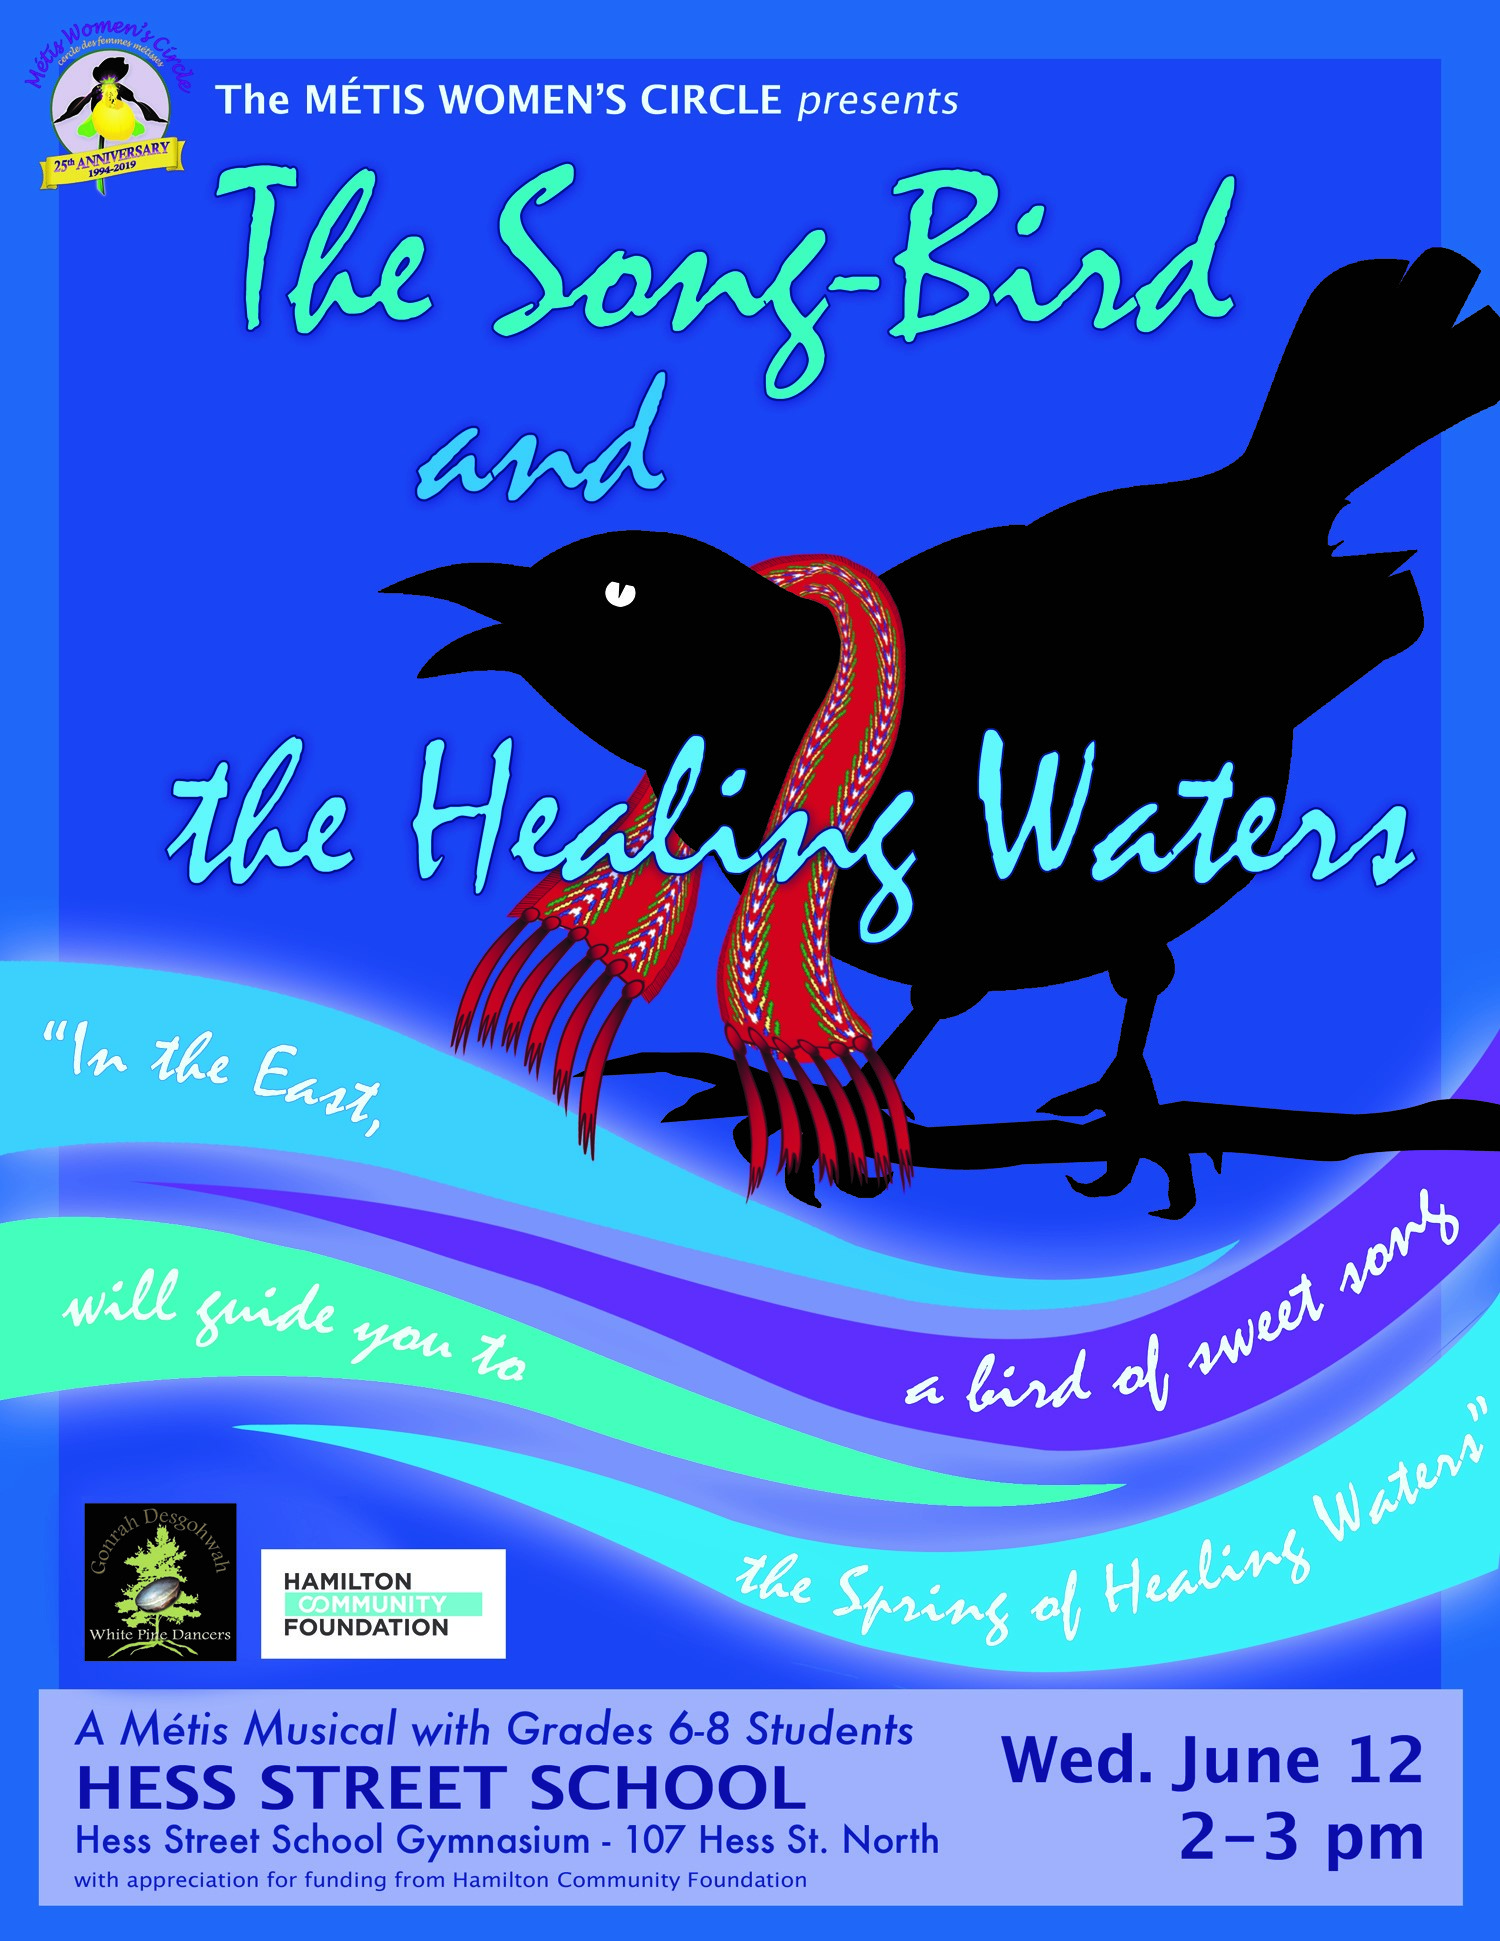 The Song-Bird and the Healing Waters